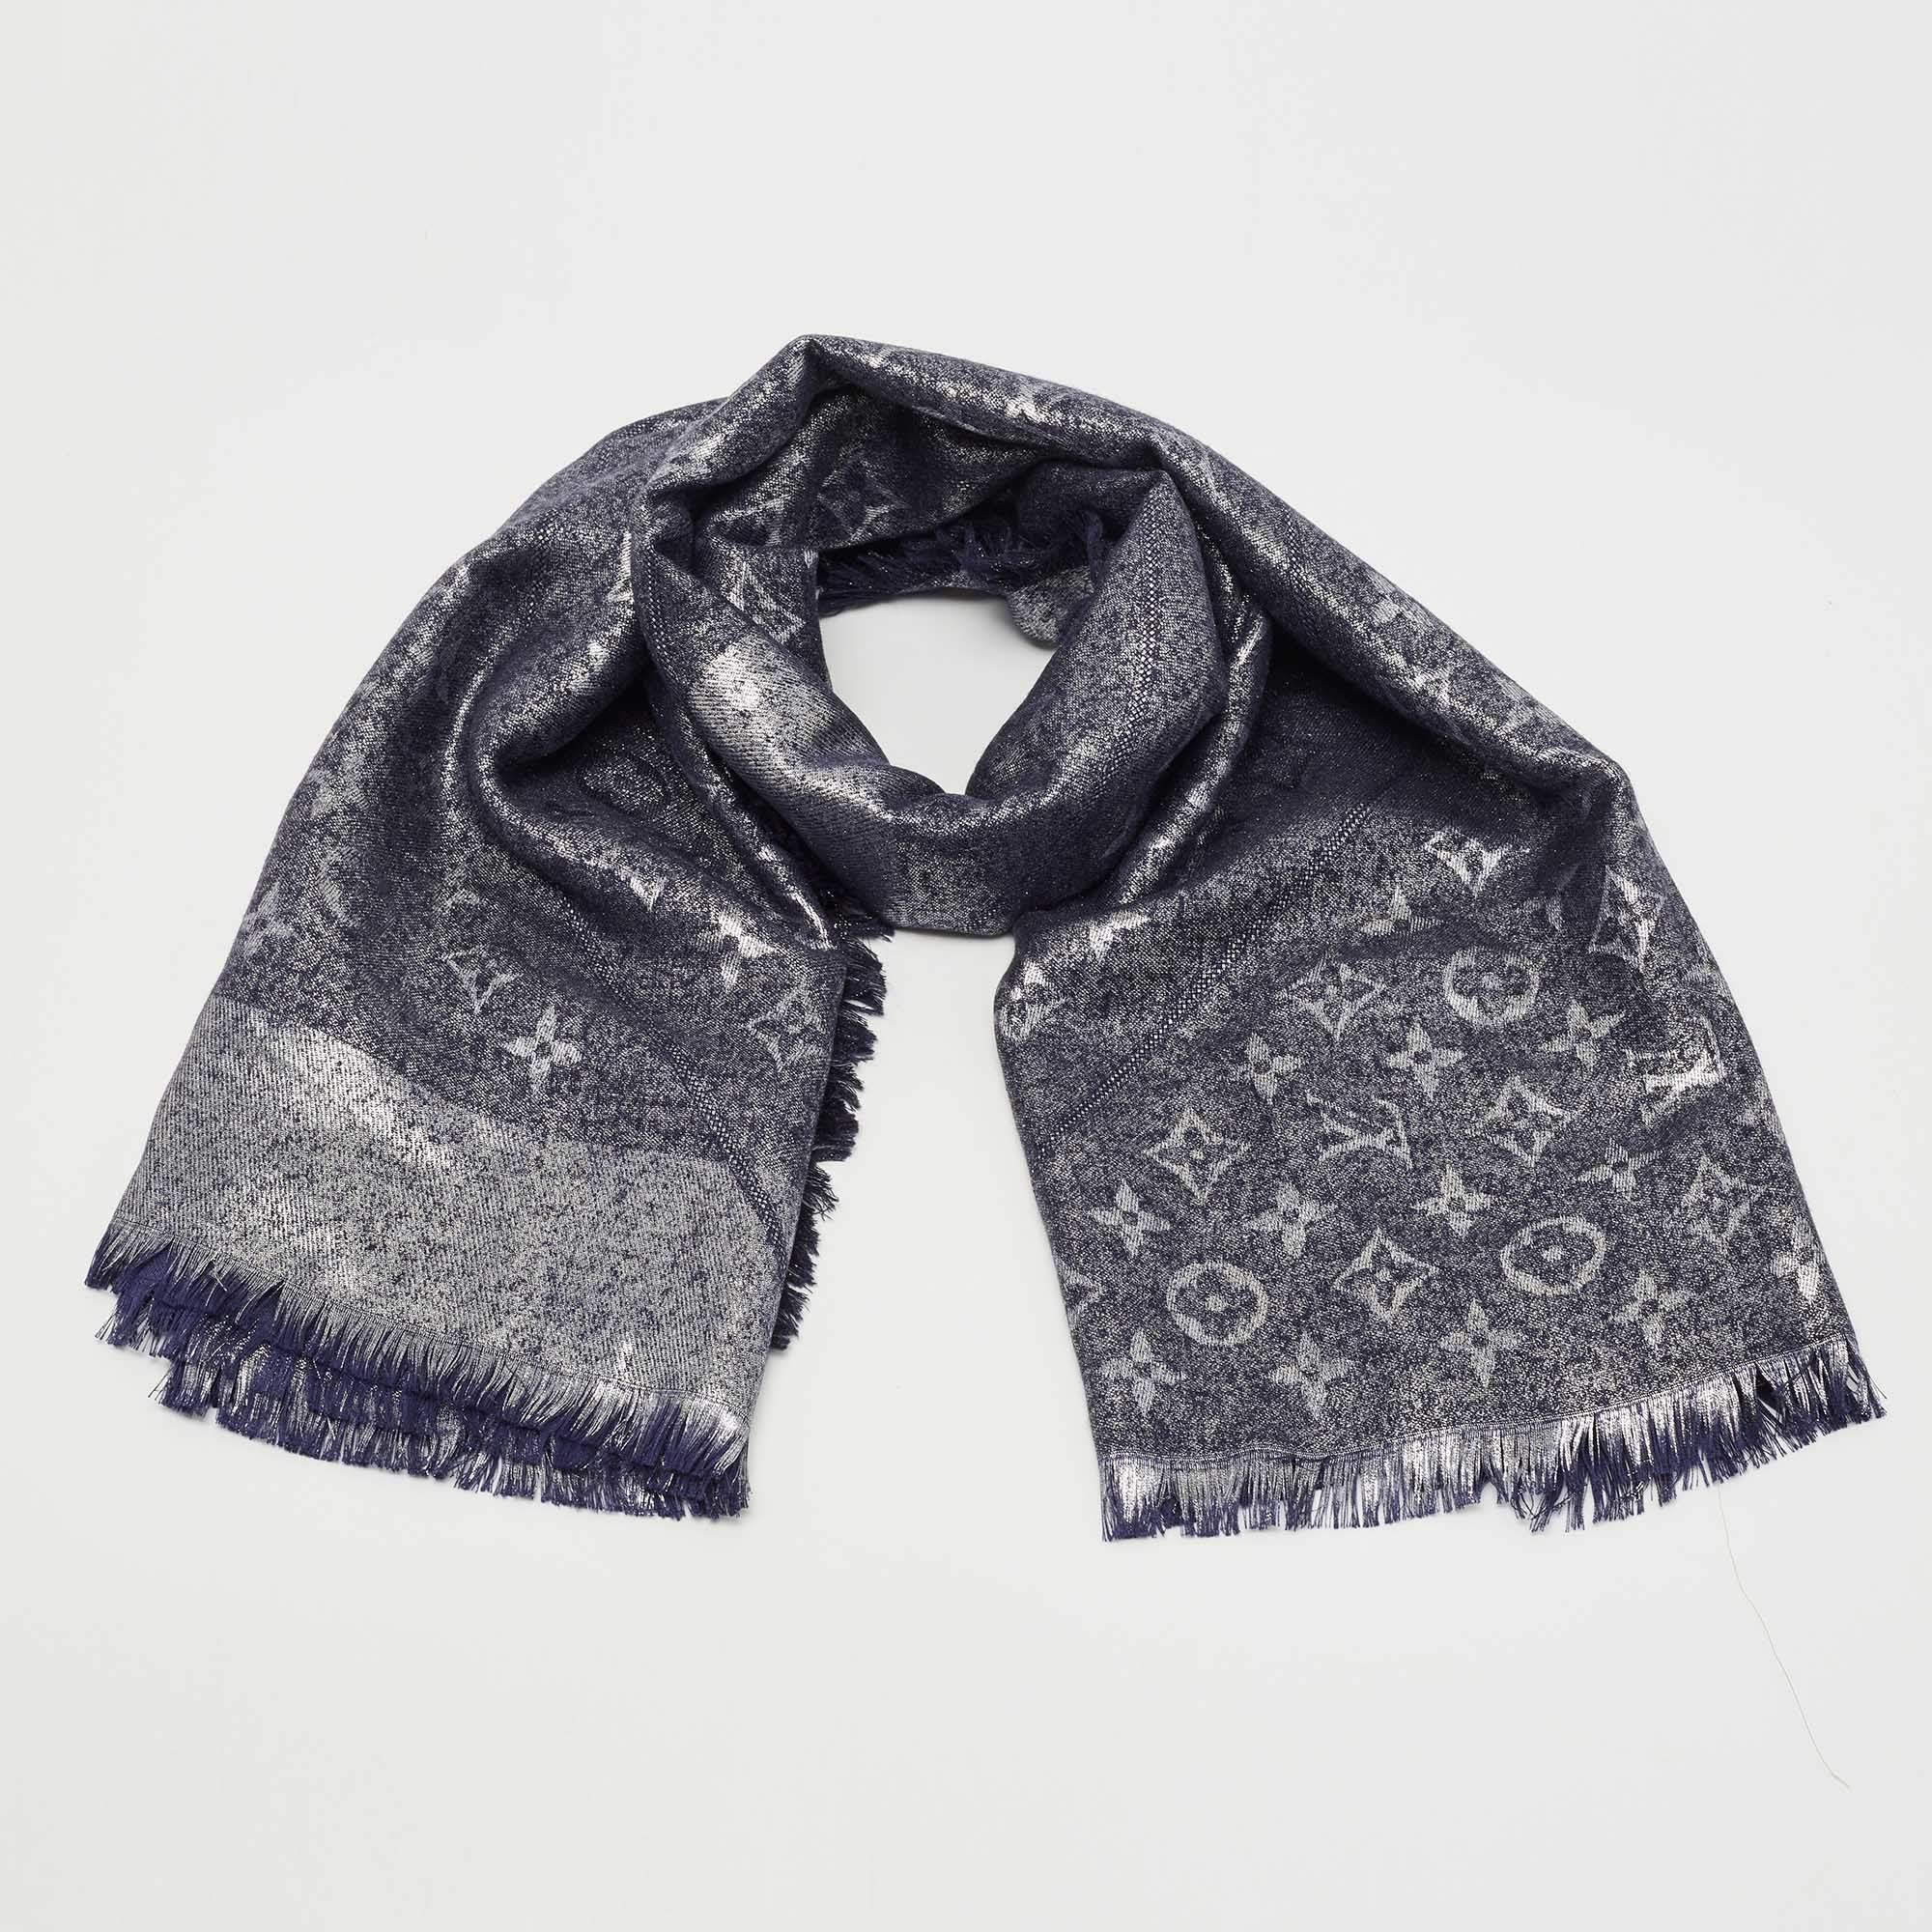 A shawl with fringes on the edges and LV's monogram pattern all over. This Louis Vuitton Logomania scarf made in Italy brings a soft feel and timeless appeal. Wrap it around your neck, and shoulders or style it with your coats and